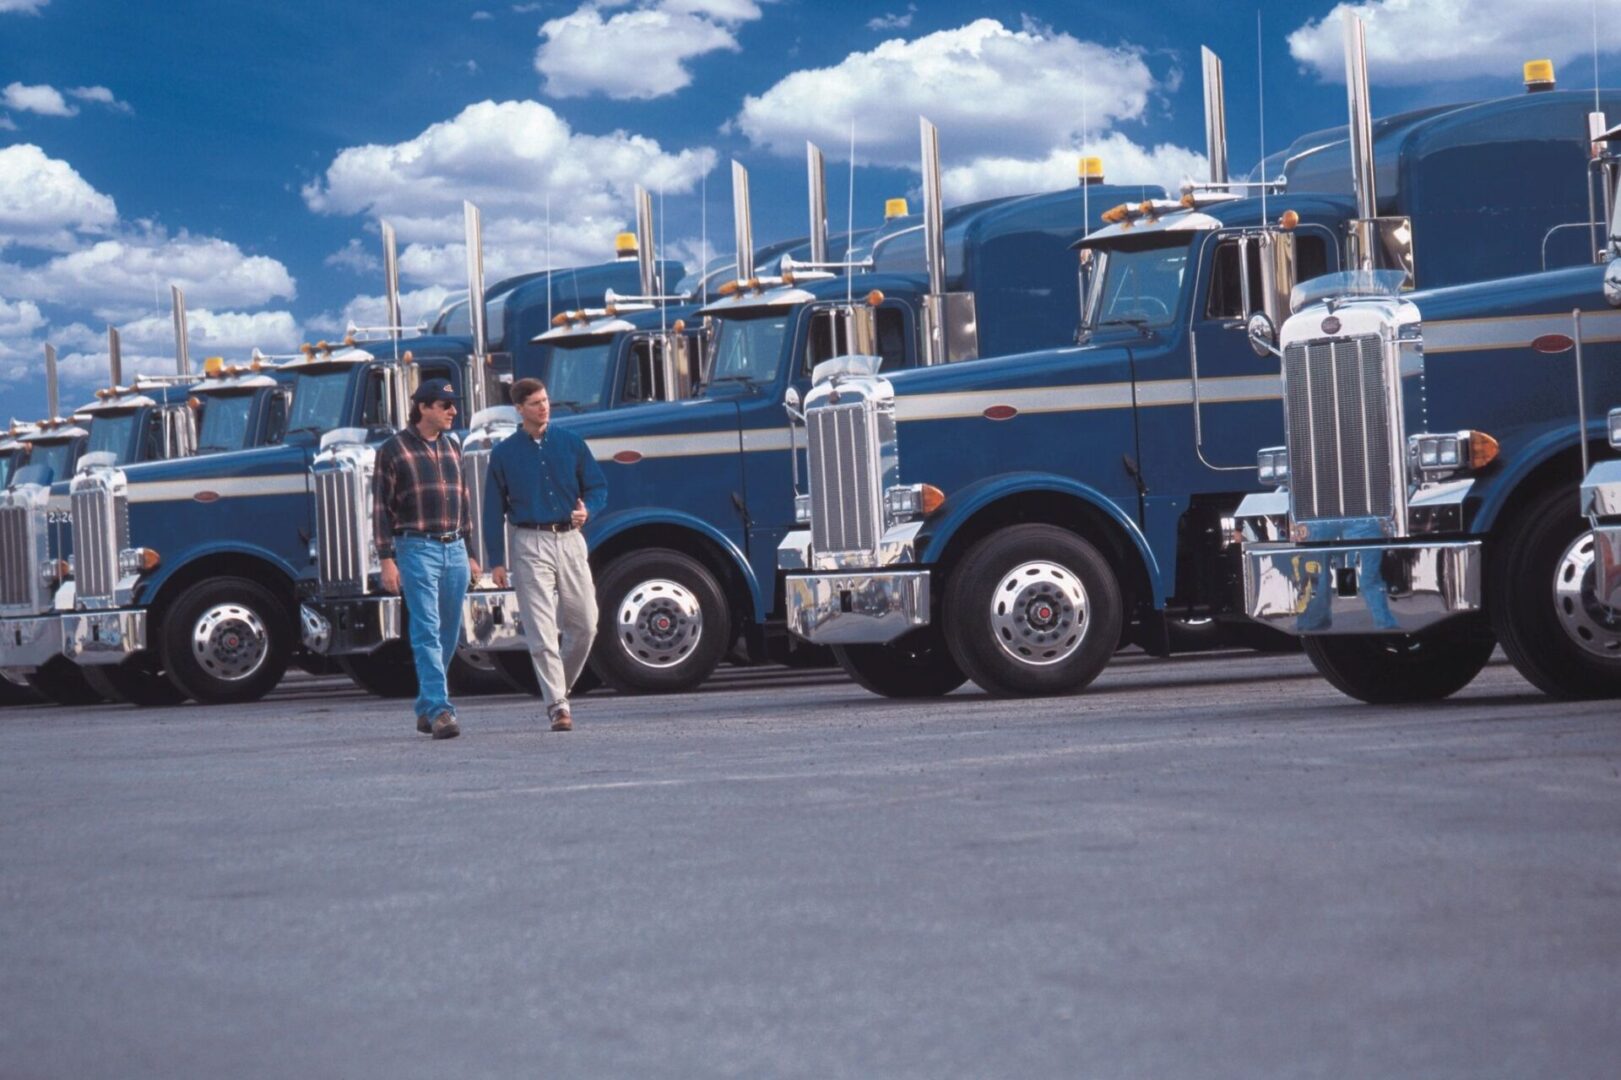 A man standing in front of a row of large trucks.